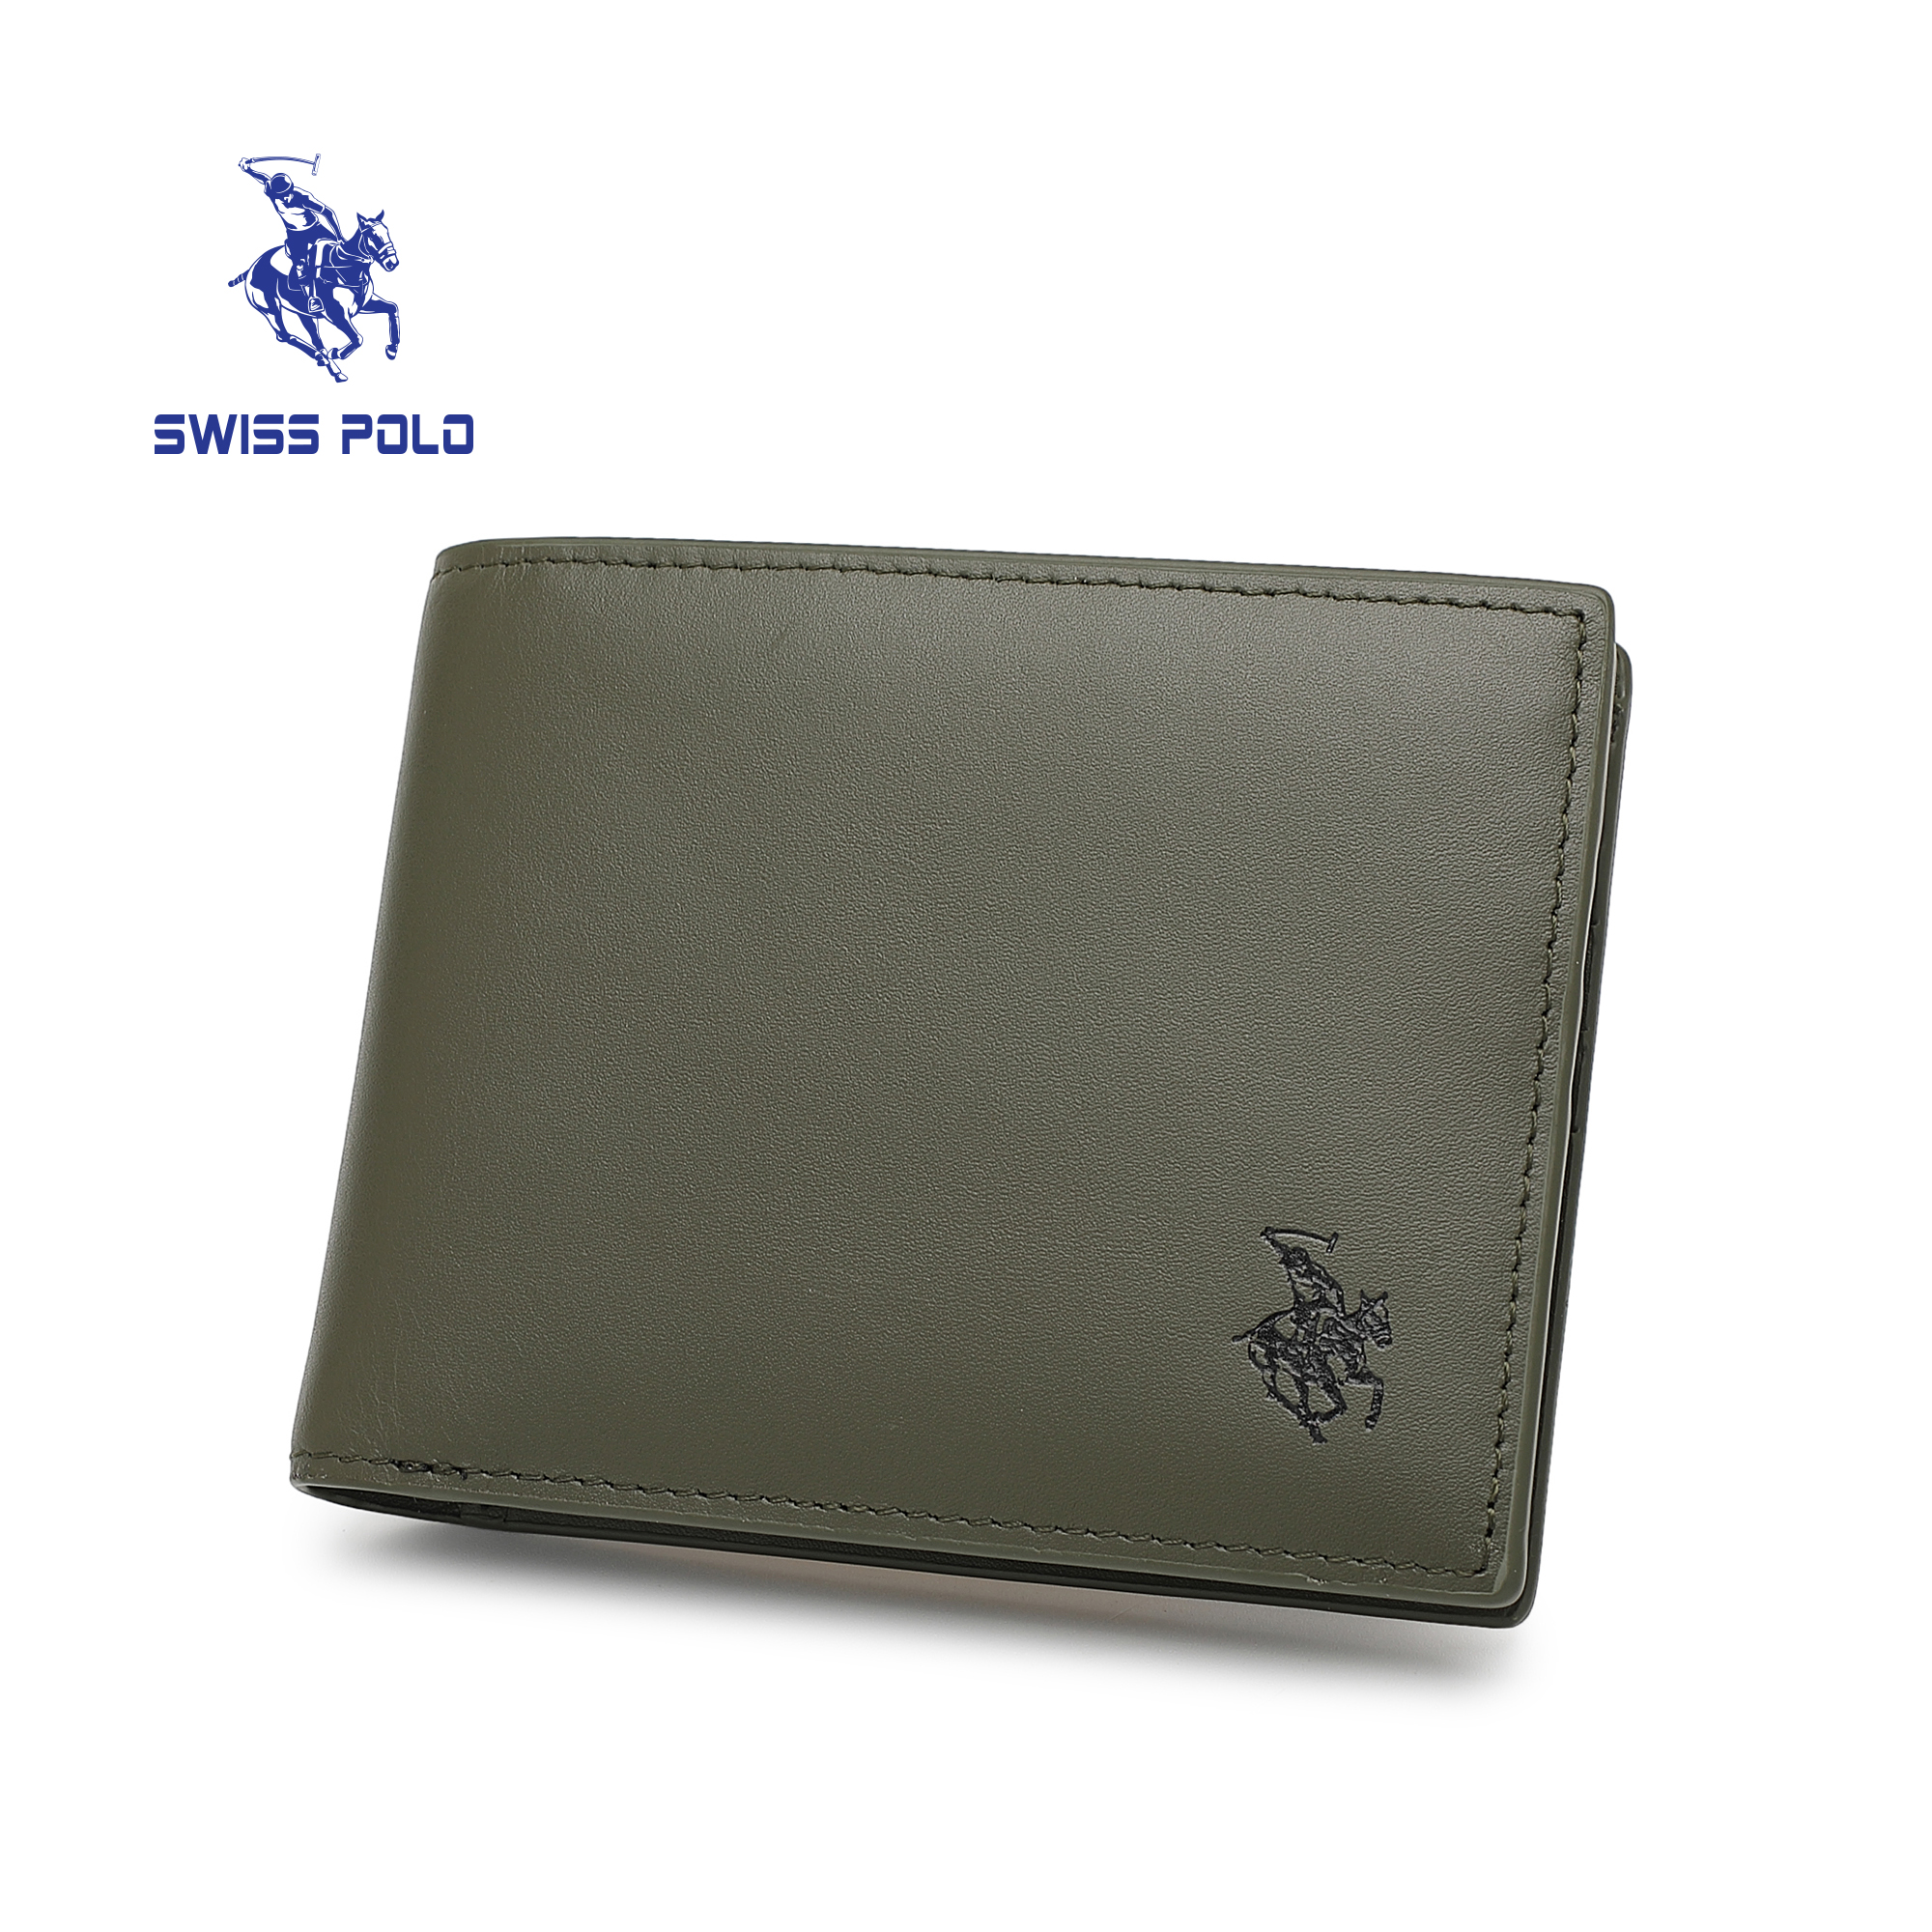 SWISS POLO Genuine Leather RFID Short Wallet SW 176-5 ARMY GREEN